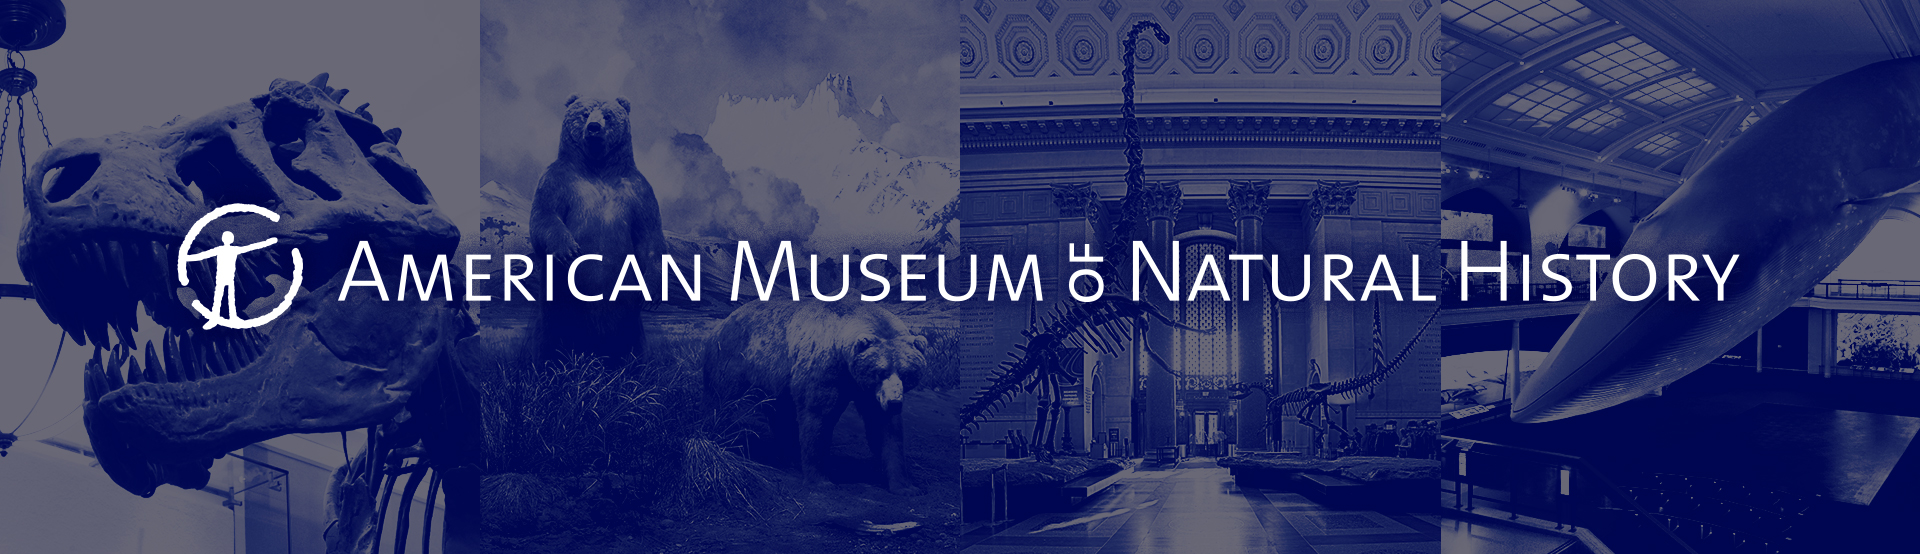 Image for American Museum of Natural History